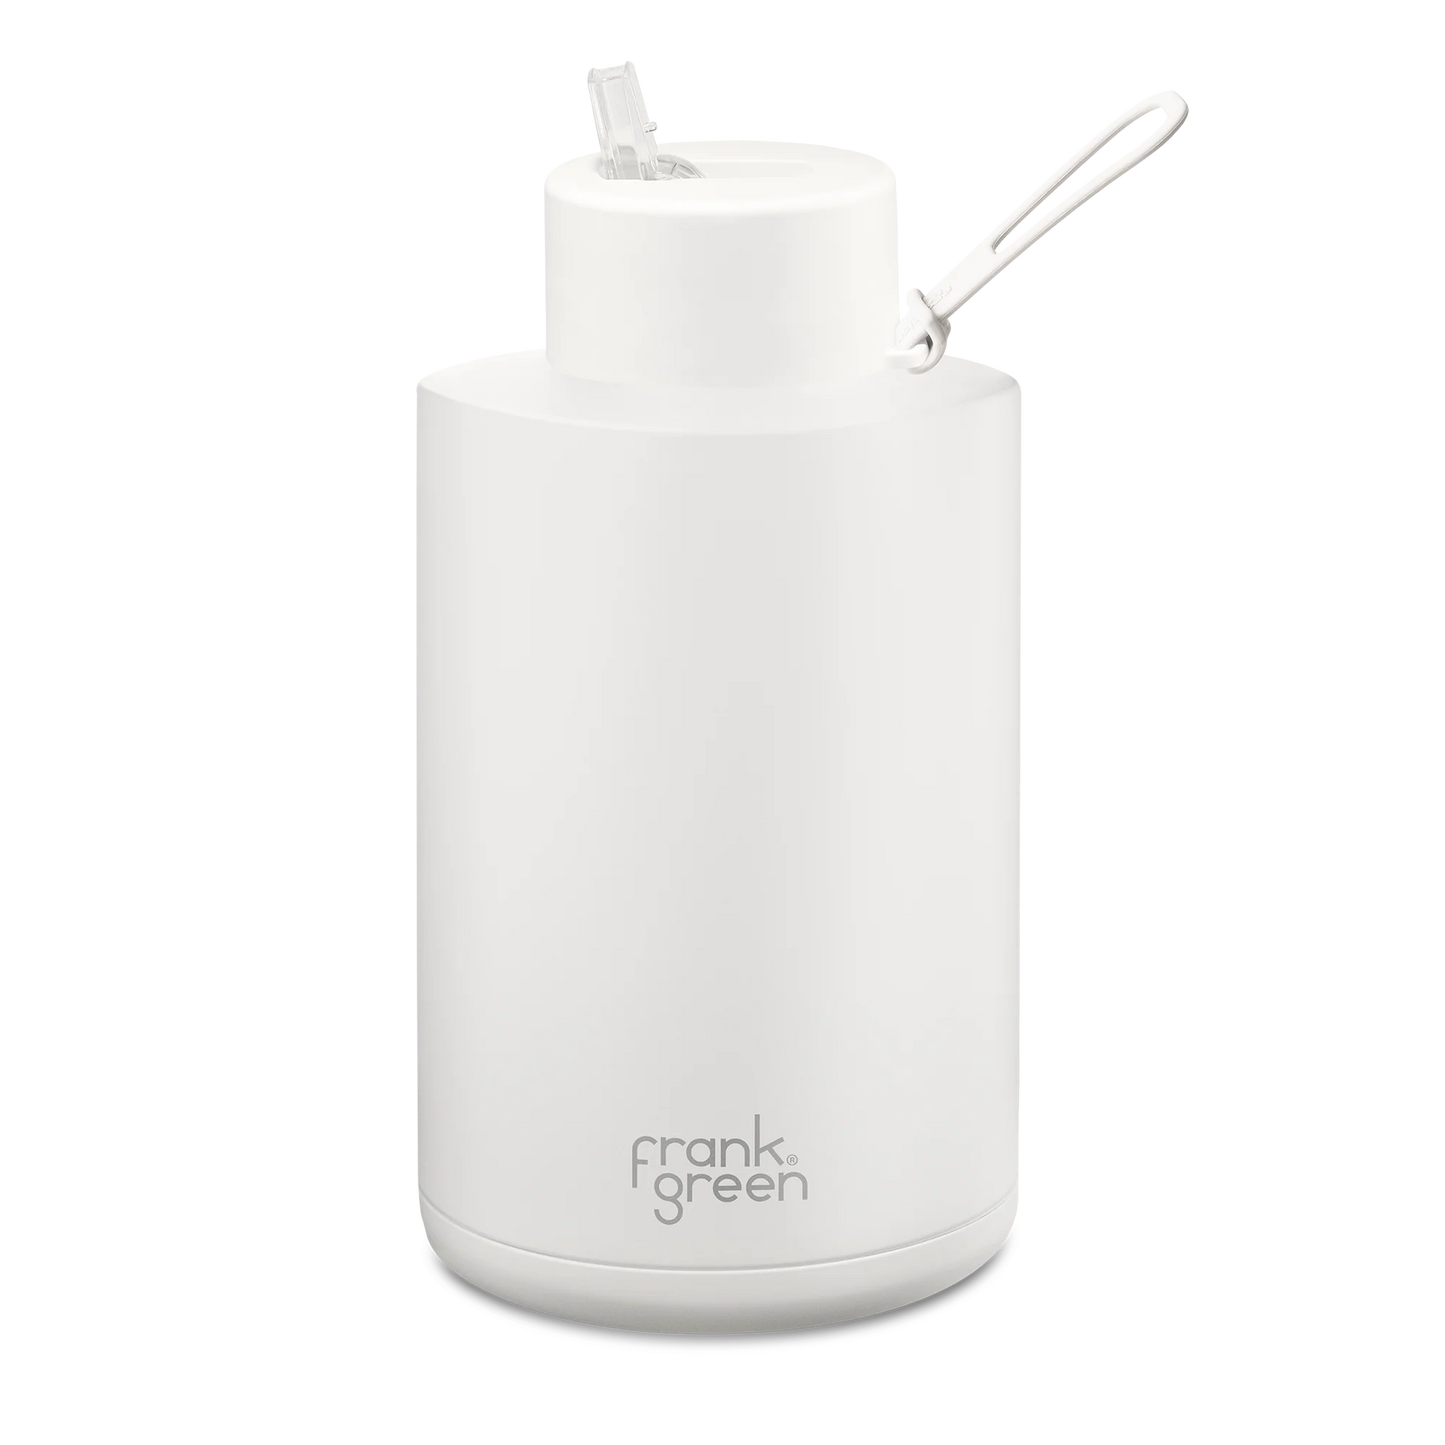 FRANK GREEN - Ceramic Reusable Bottle with Straw Lid - Extra Large 68oz / 2,000ml